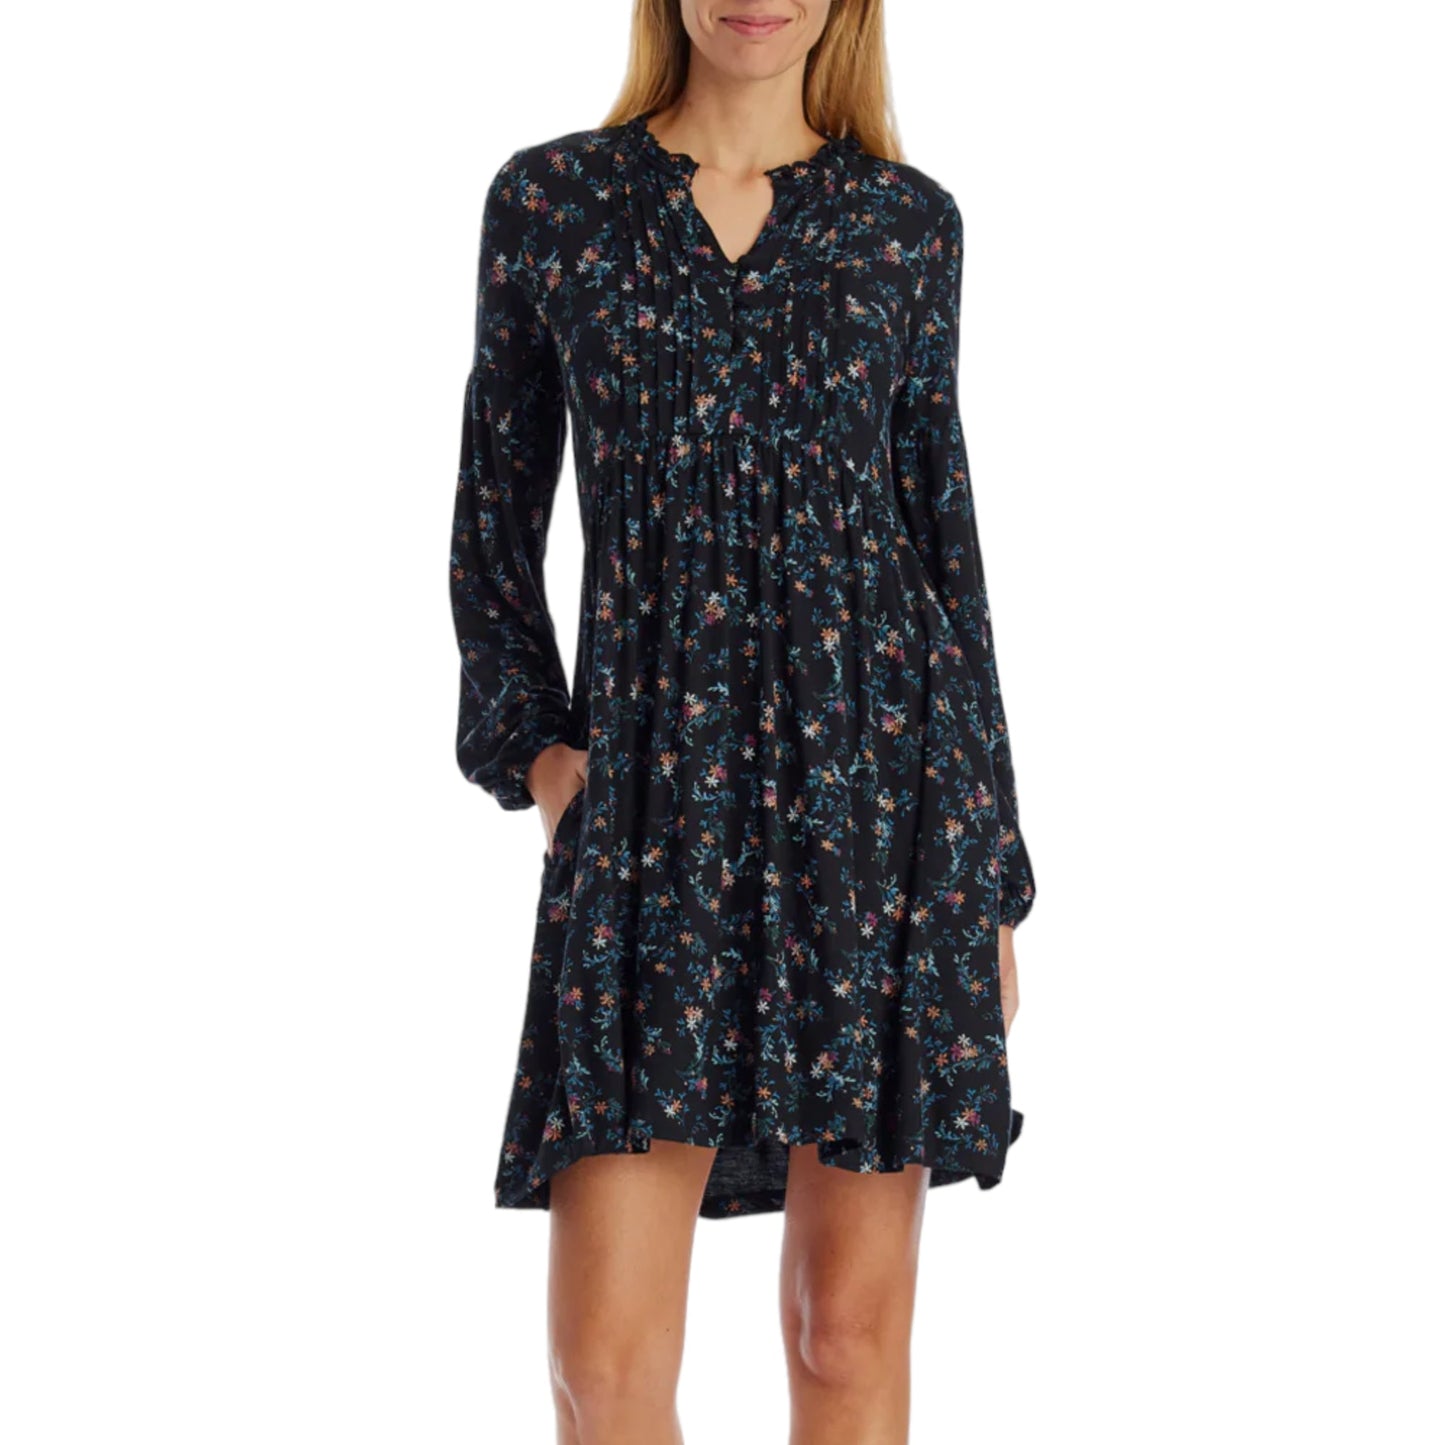 FATFACE Women's Nieve Nordic Floral Print Long Sleeve Tired Mini Dress